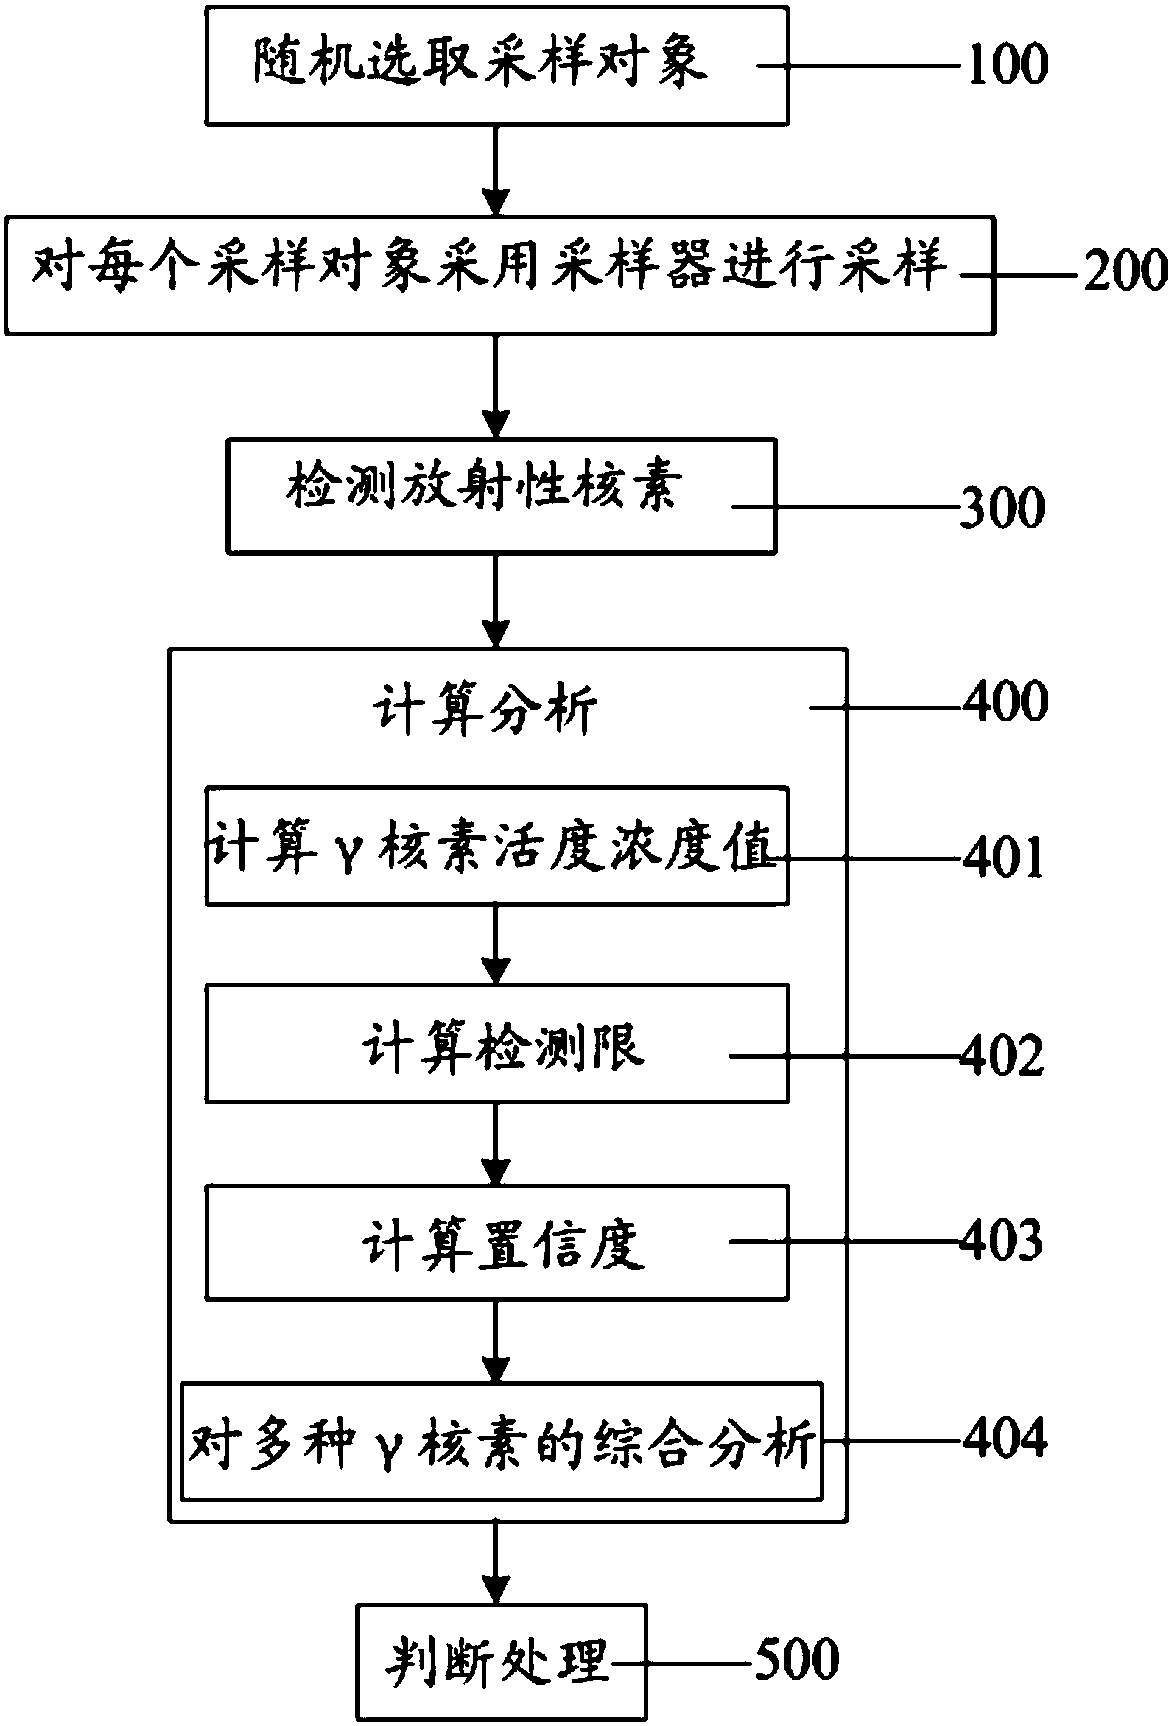 Method of processing waste resin of nuclear power plant